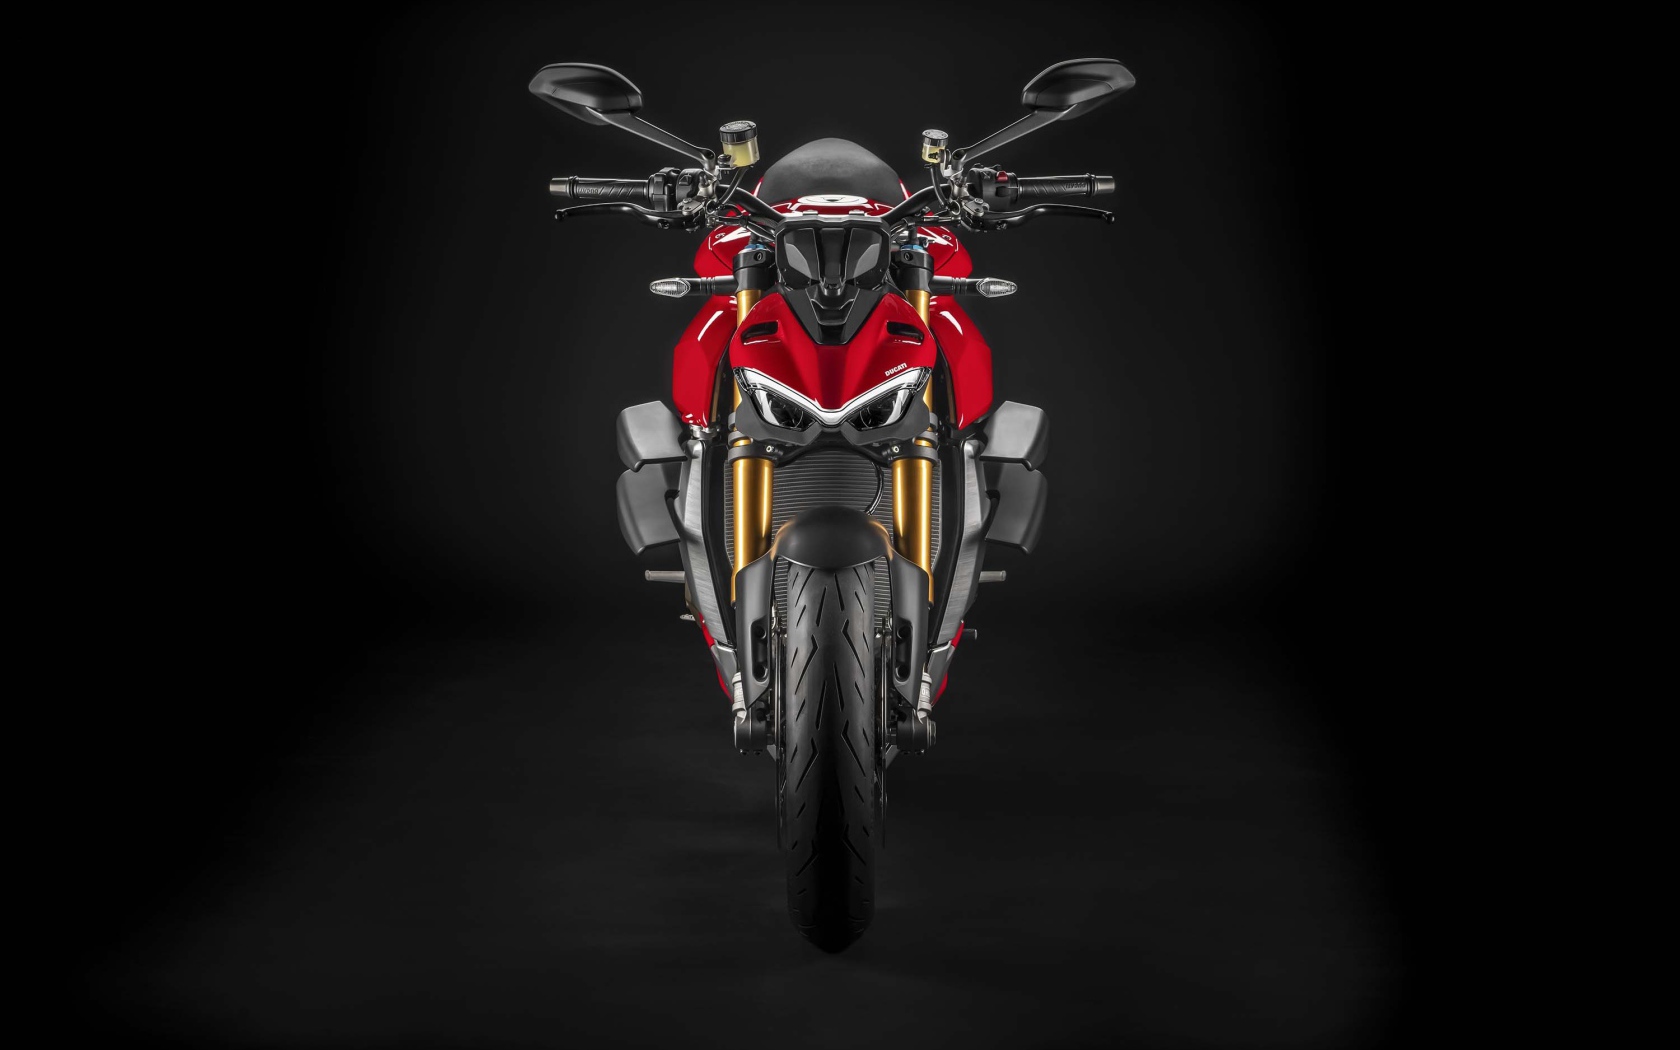 Ducati Streetfighter V4 motorcycle, 2020 front view